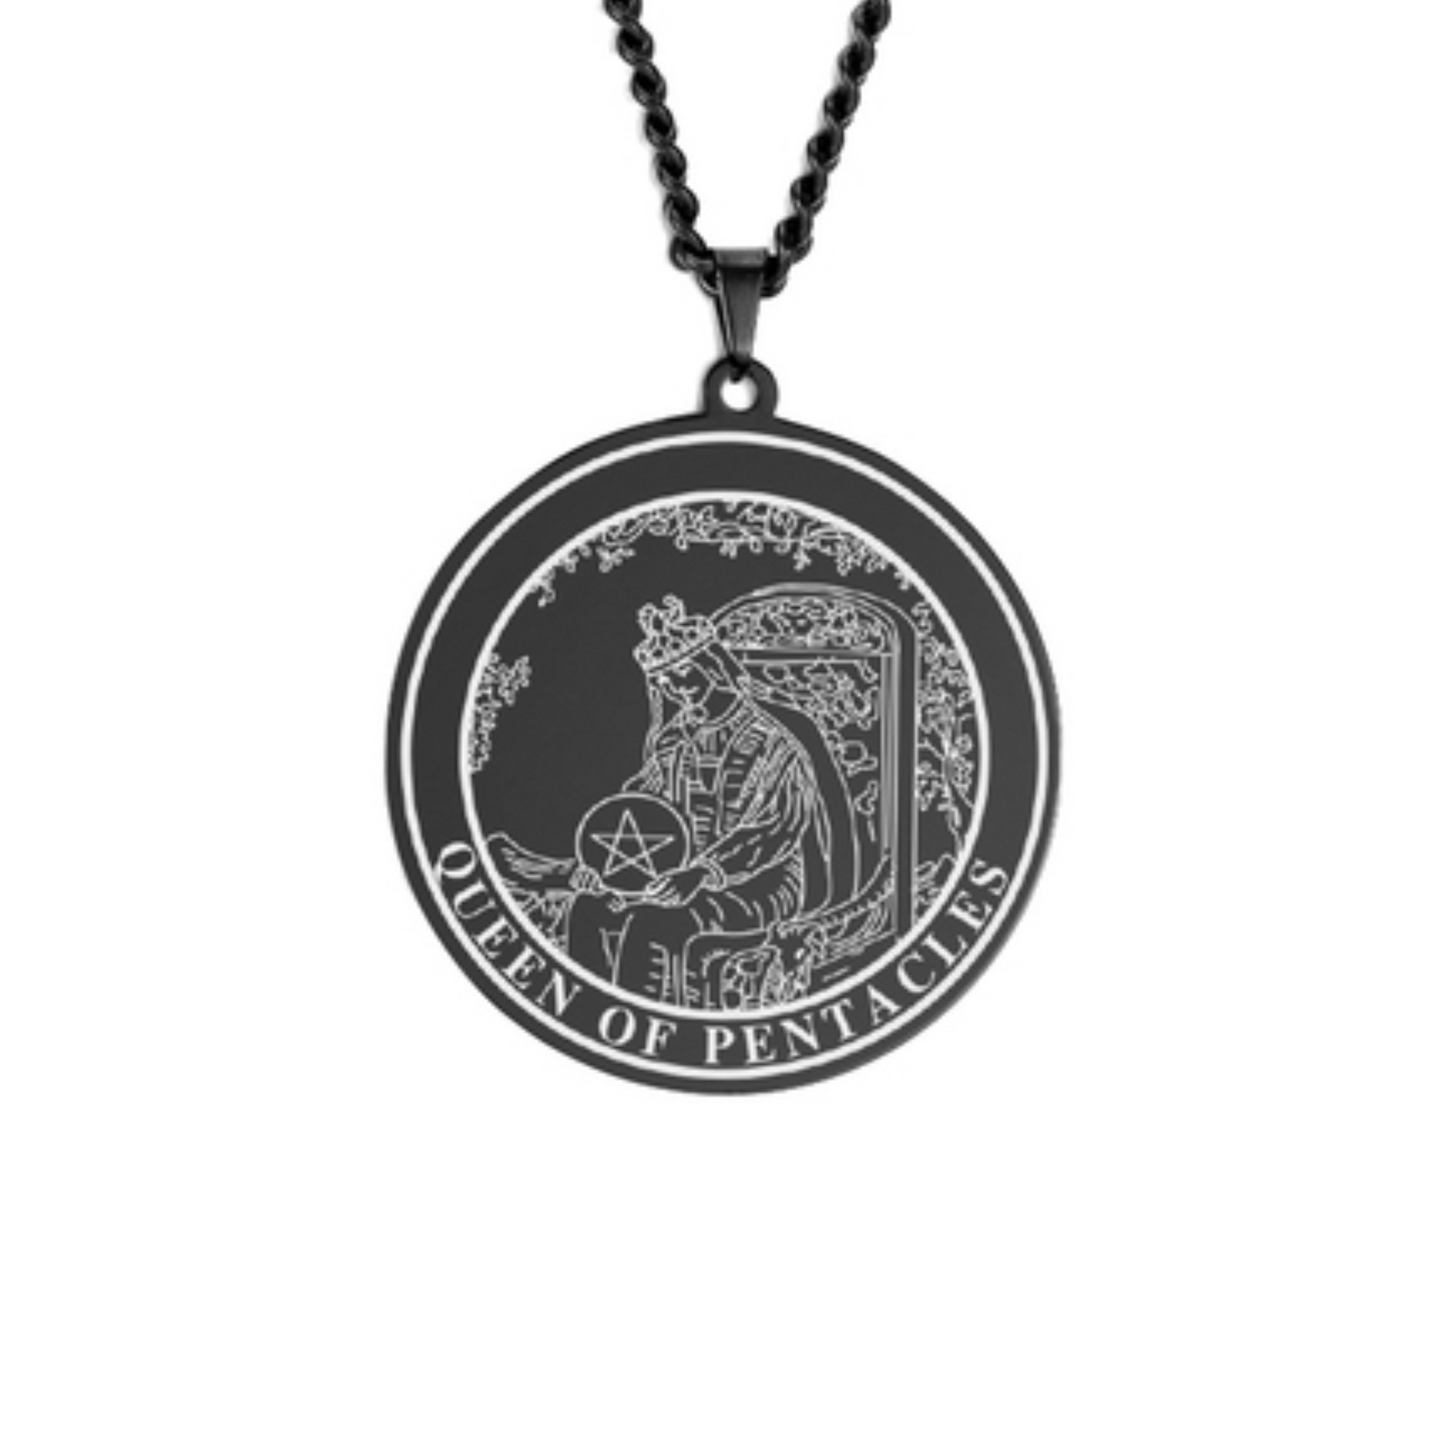 'Queen of Pentacles' Tarot Card, Minor Arcana Round Pendant - Necklace | Jewelry